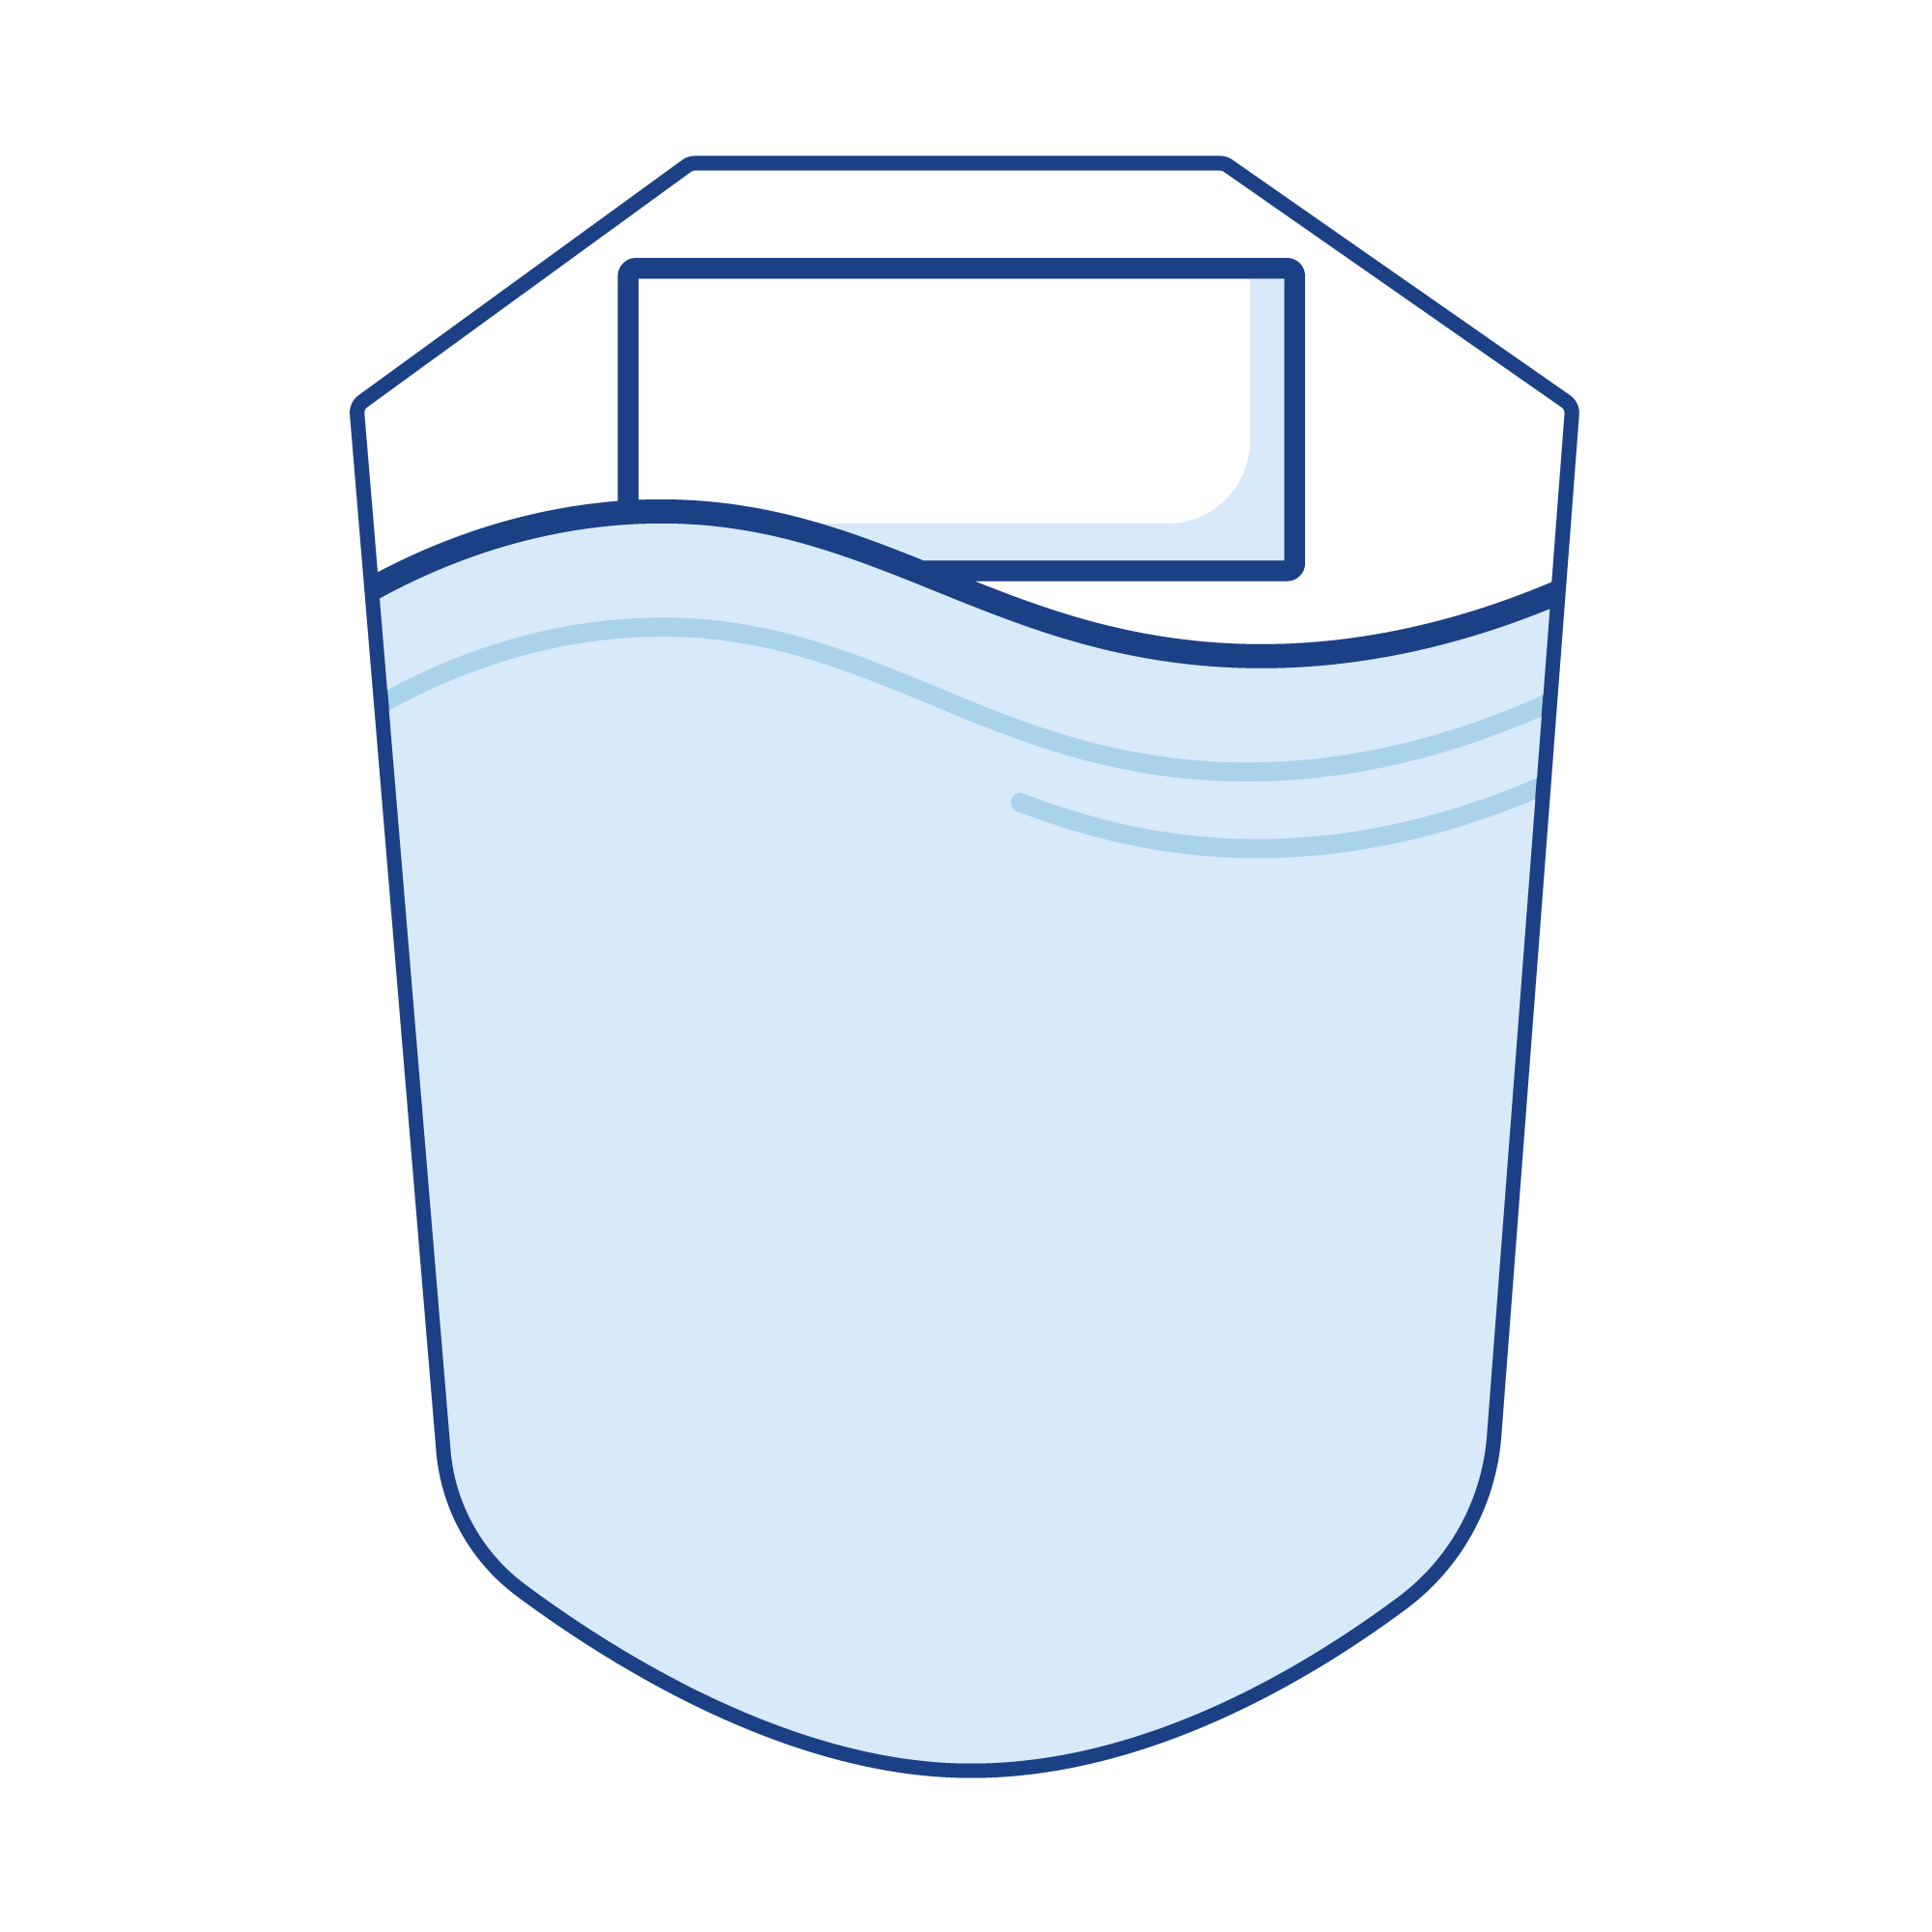 Illustration of a mattress topper with a shape designed to fit a boat hull.